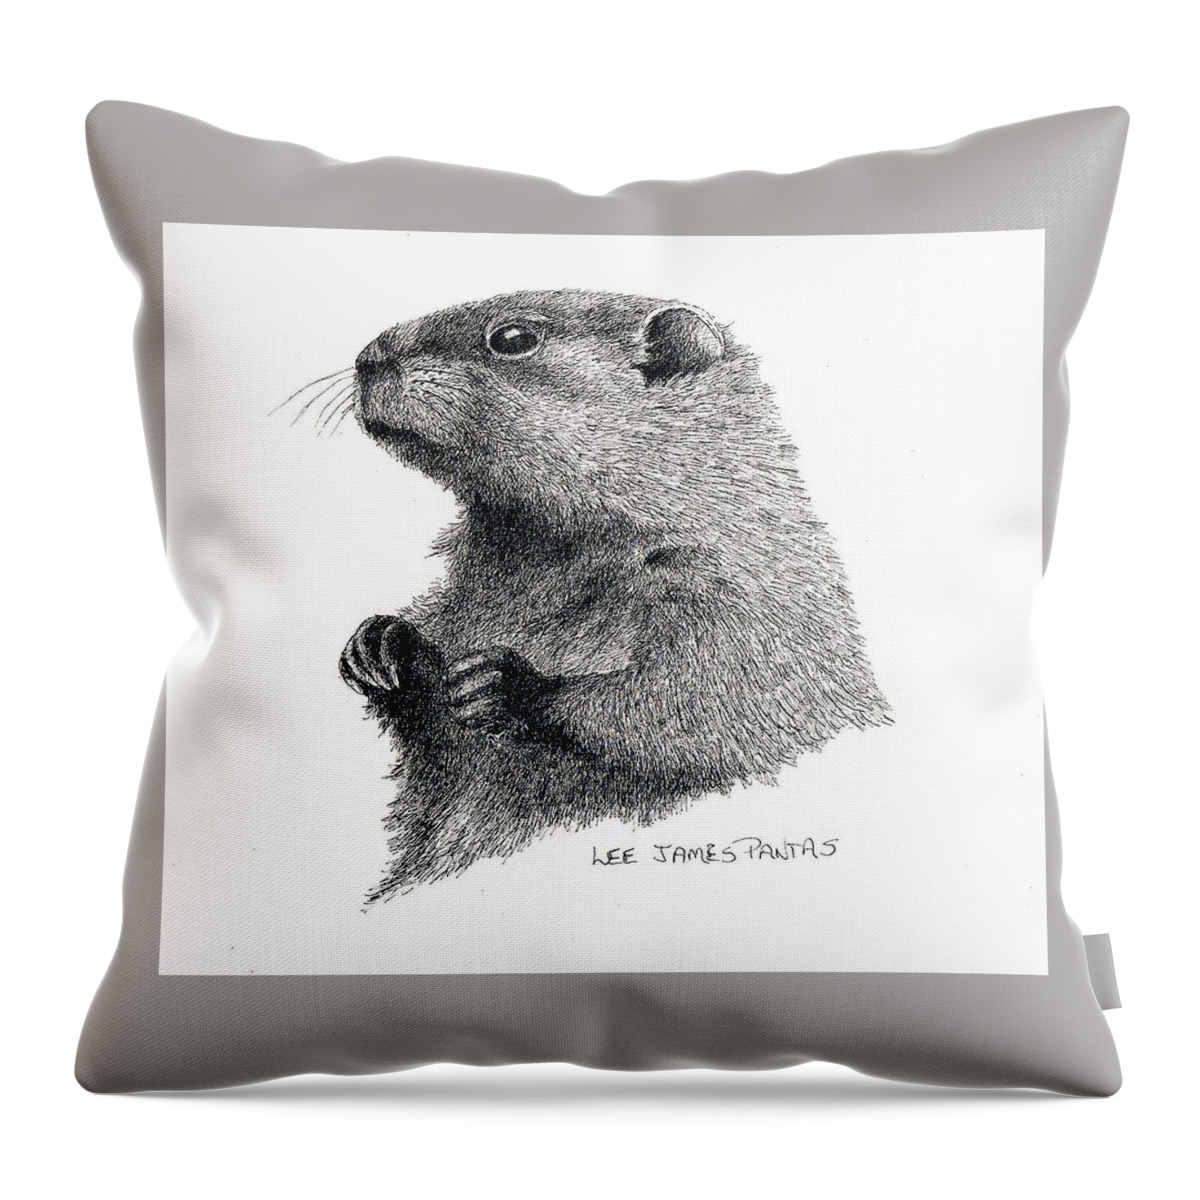 Woodchuck Throw Pillow featuring the drawing Groundhog or Woodchuck by Lee Pantas